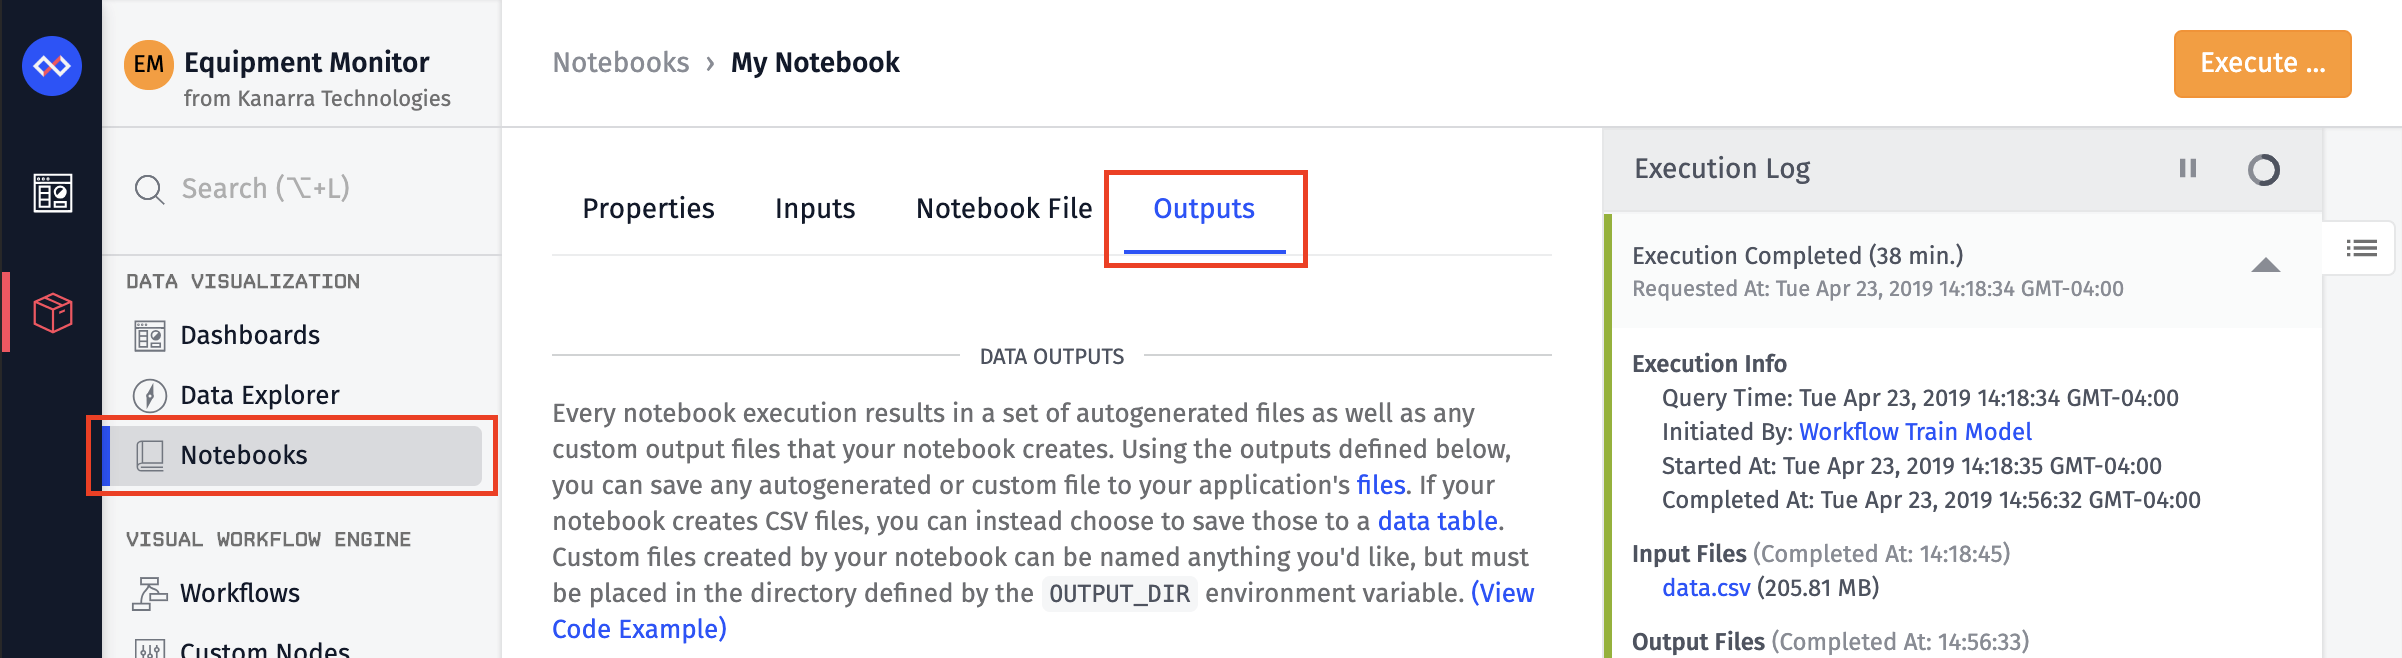 Notebook Outputs Overview